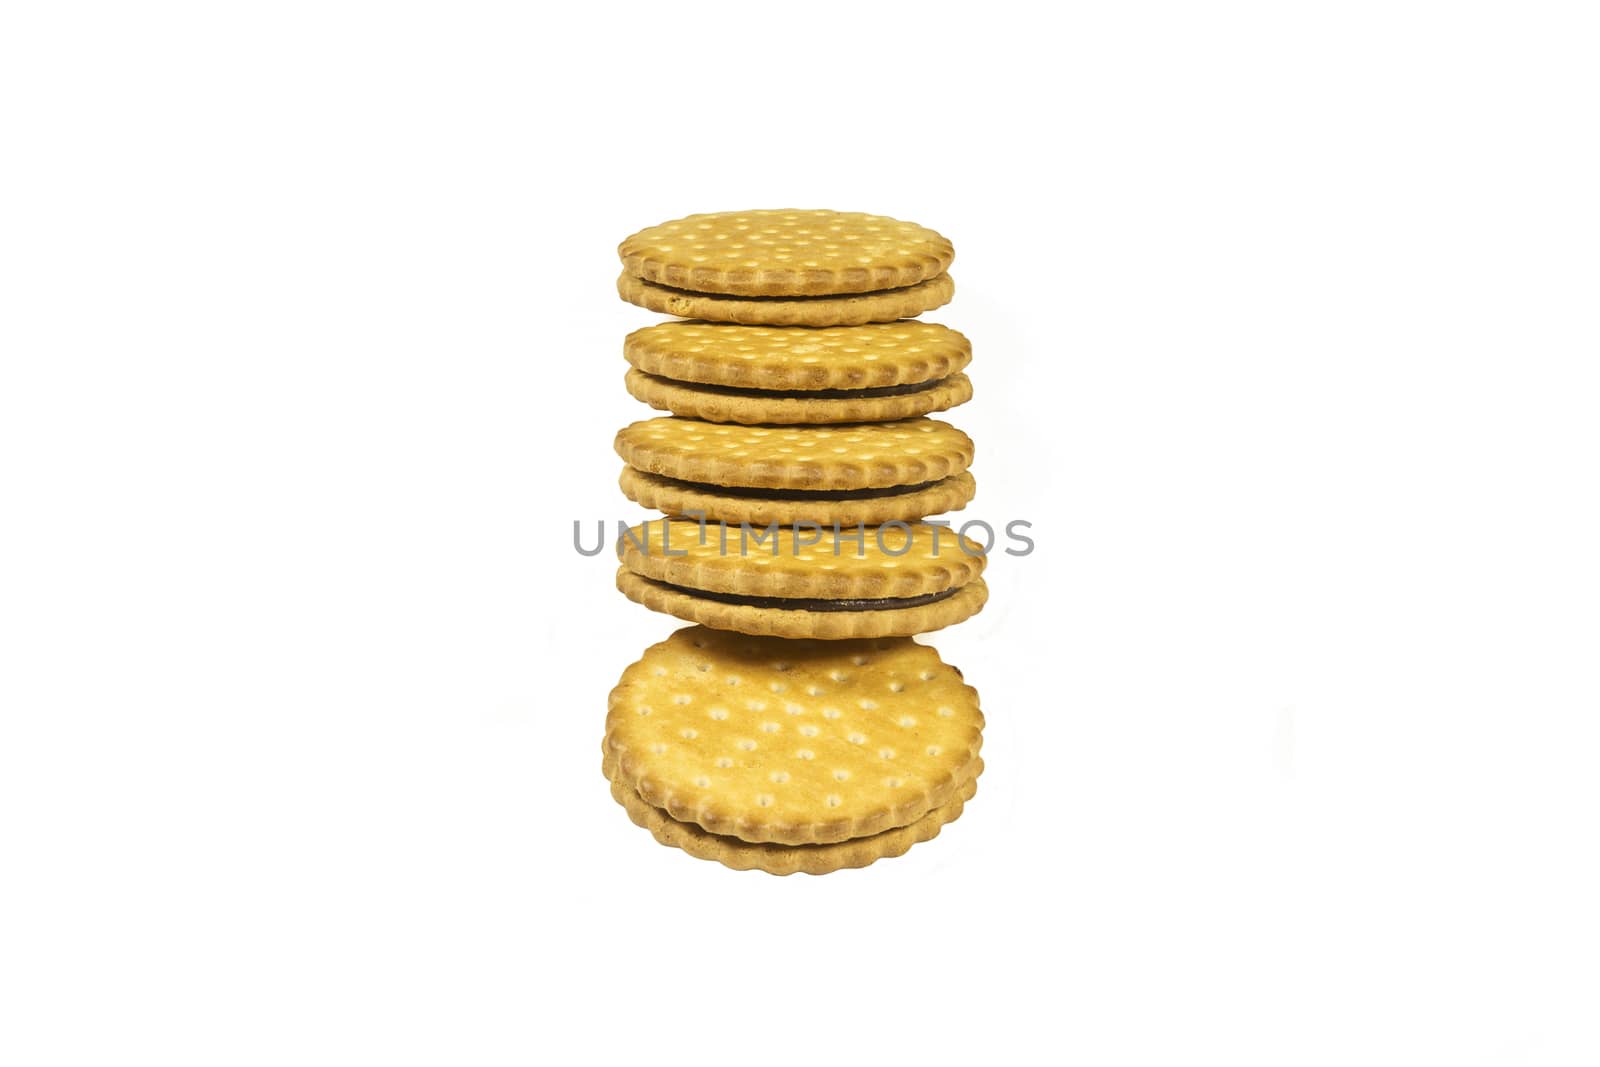 Round biscuits with chocolate filling on a light background